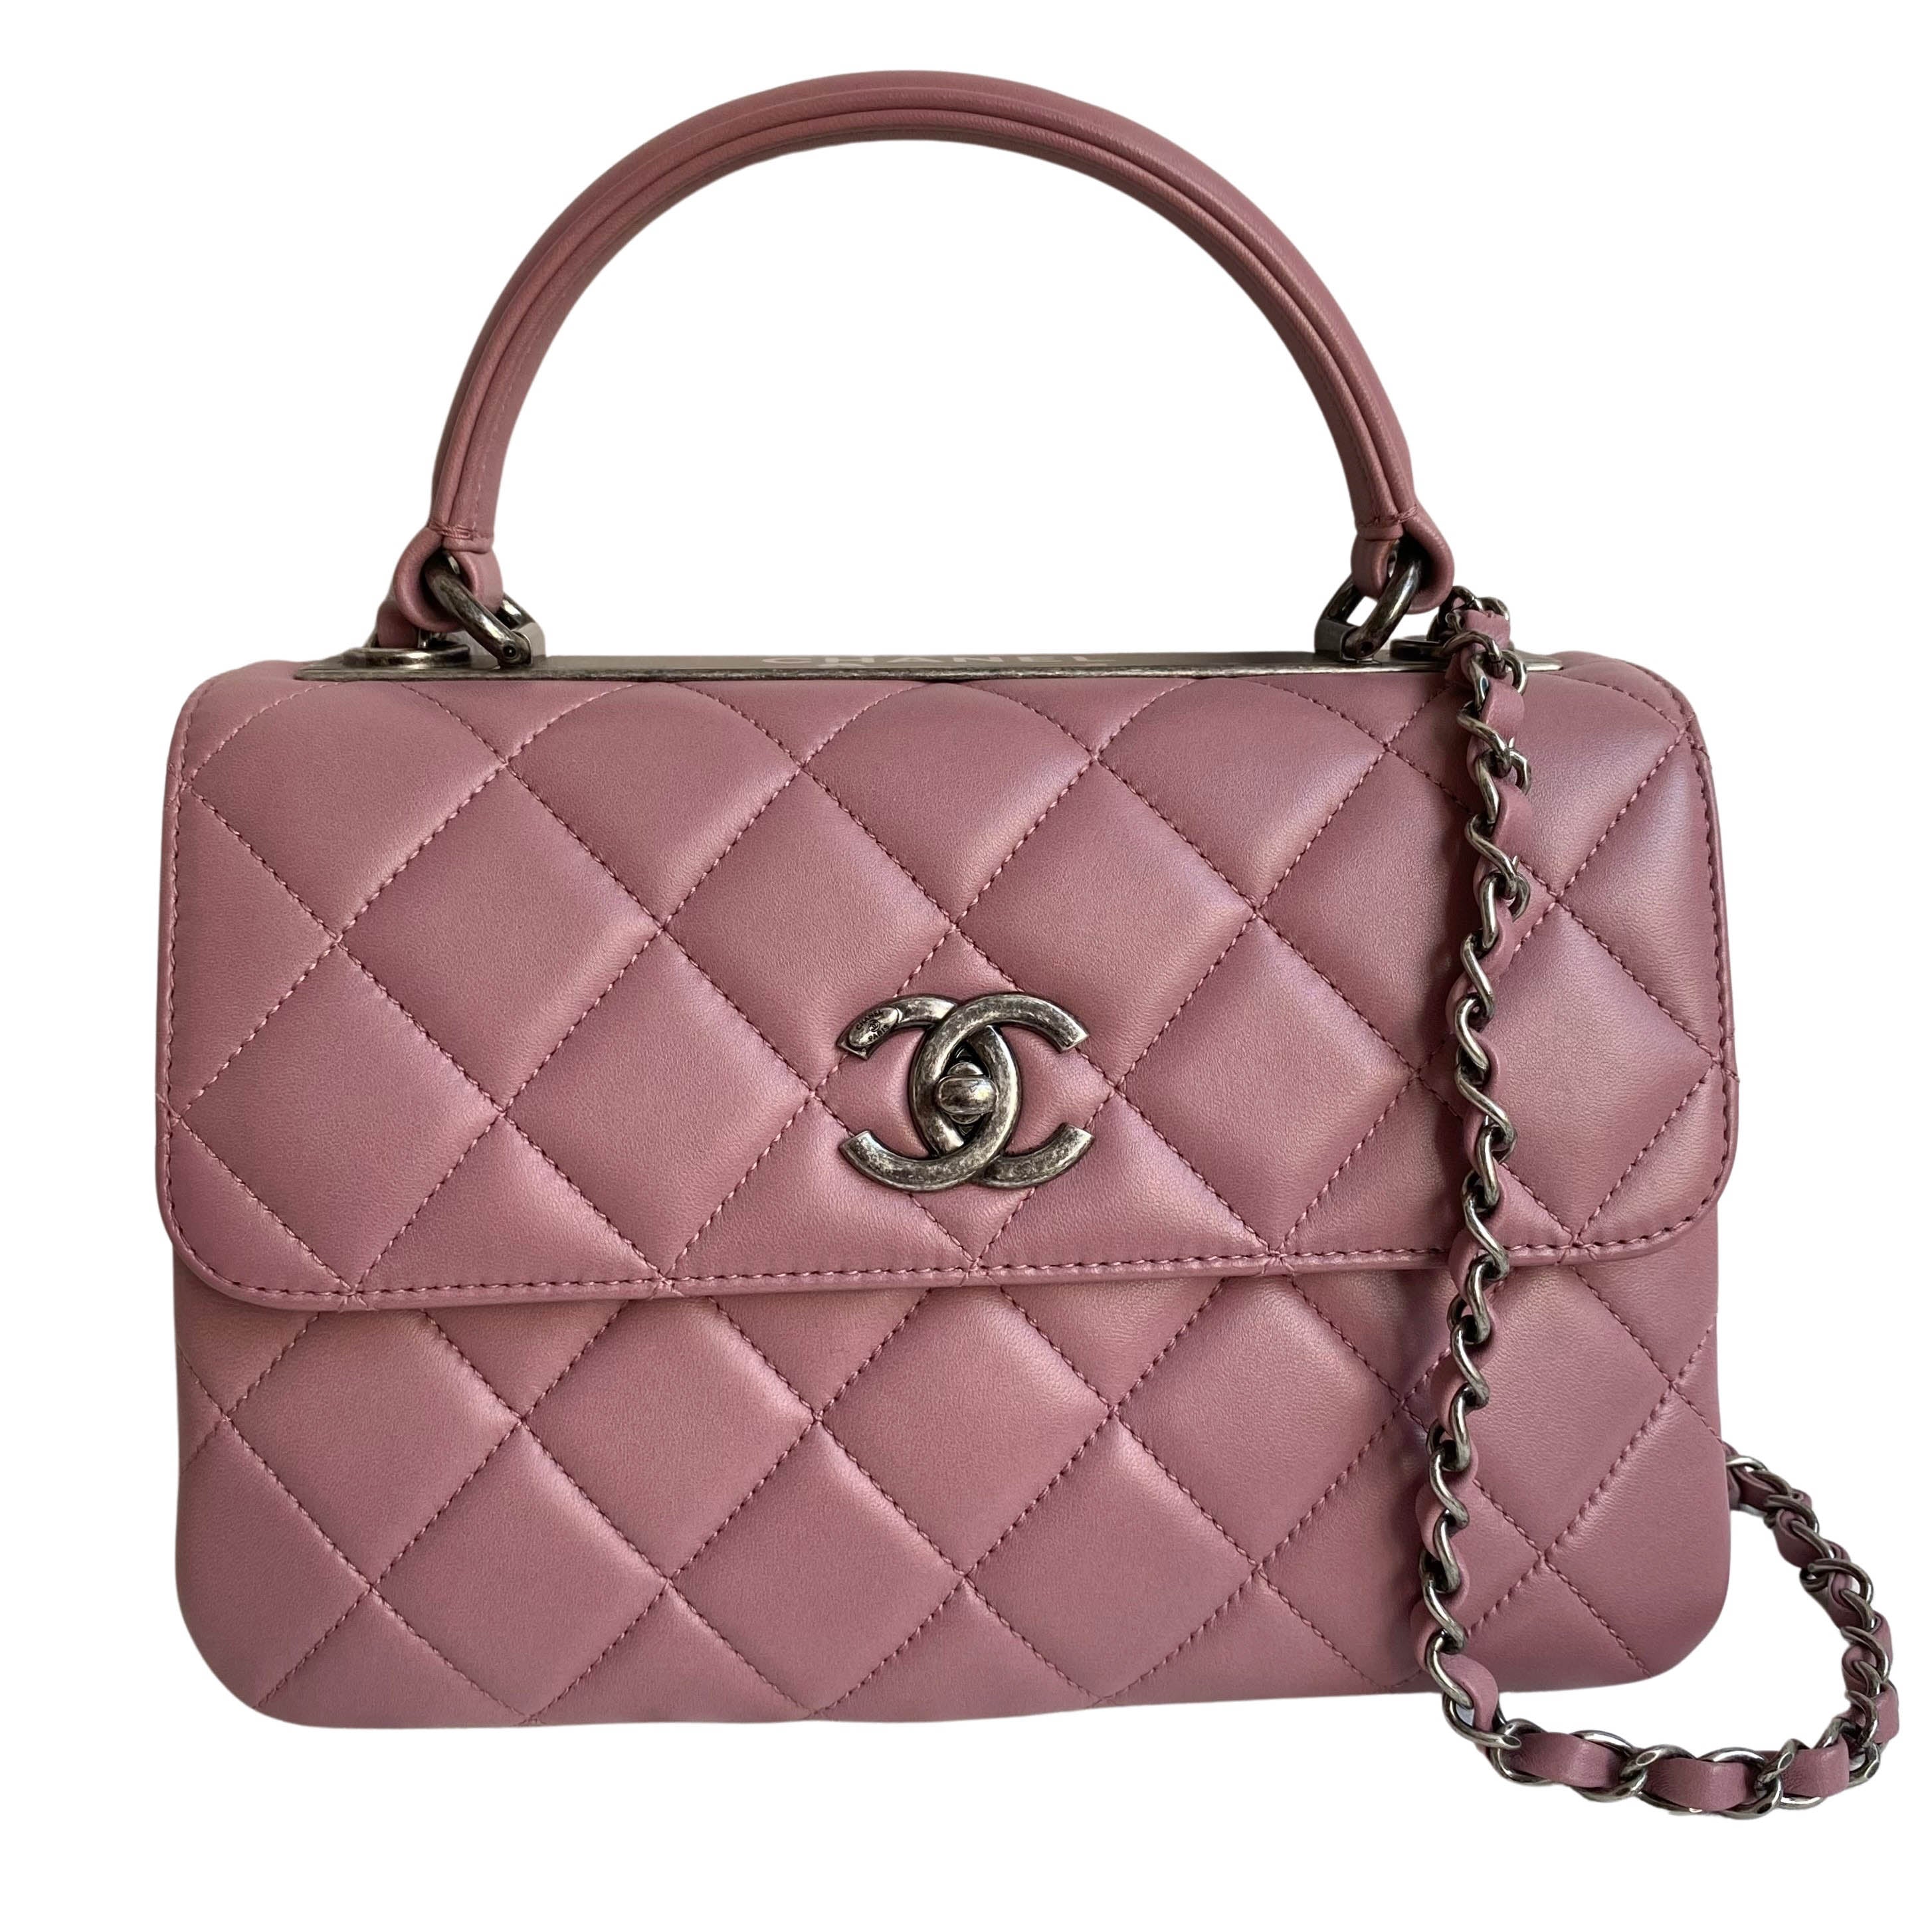 CHANEL Small Trendy CC Flap Bag with Top Handle in Mauve Pink